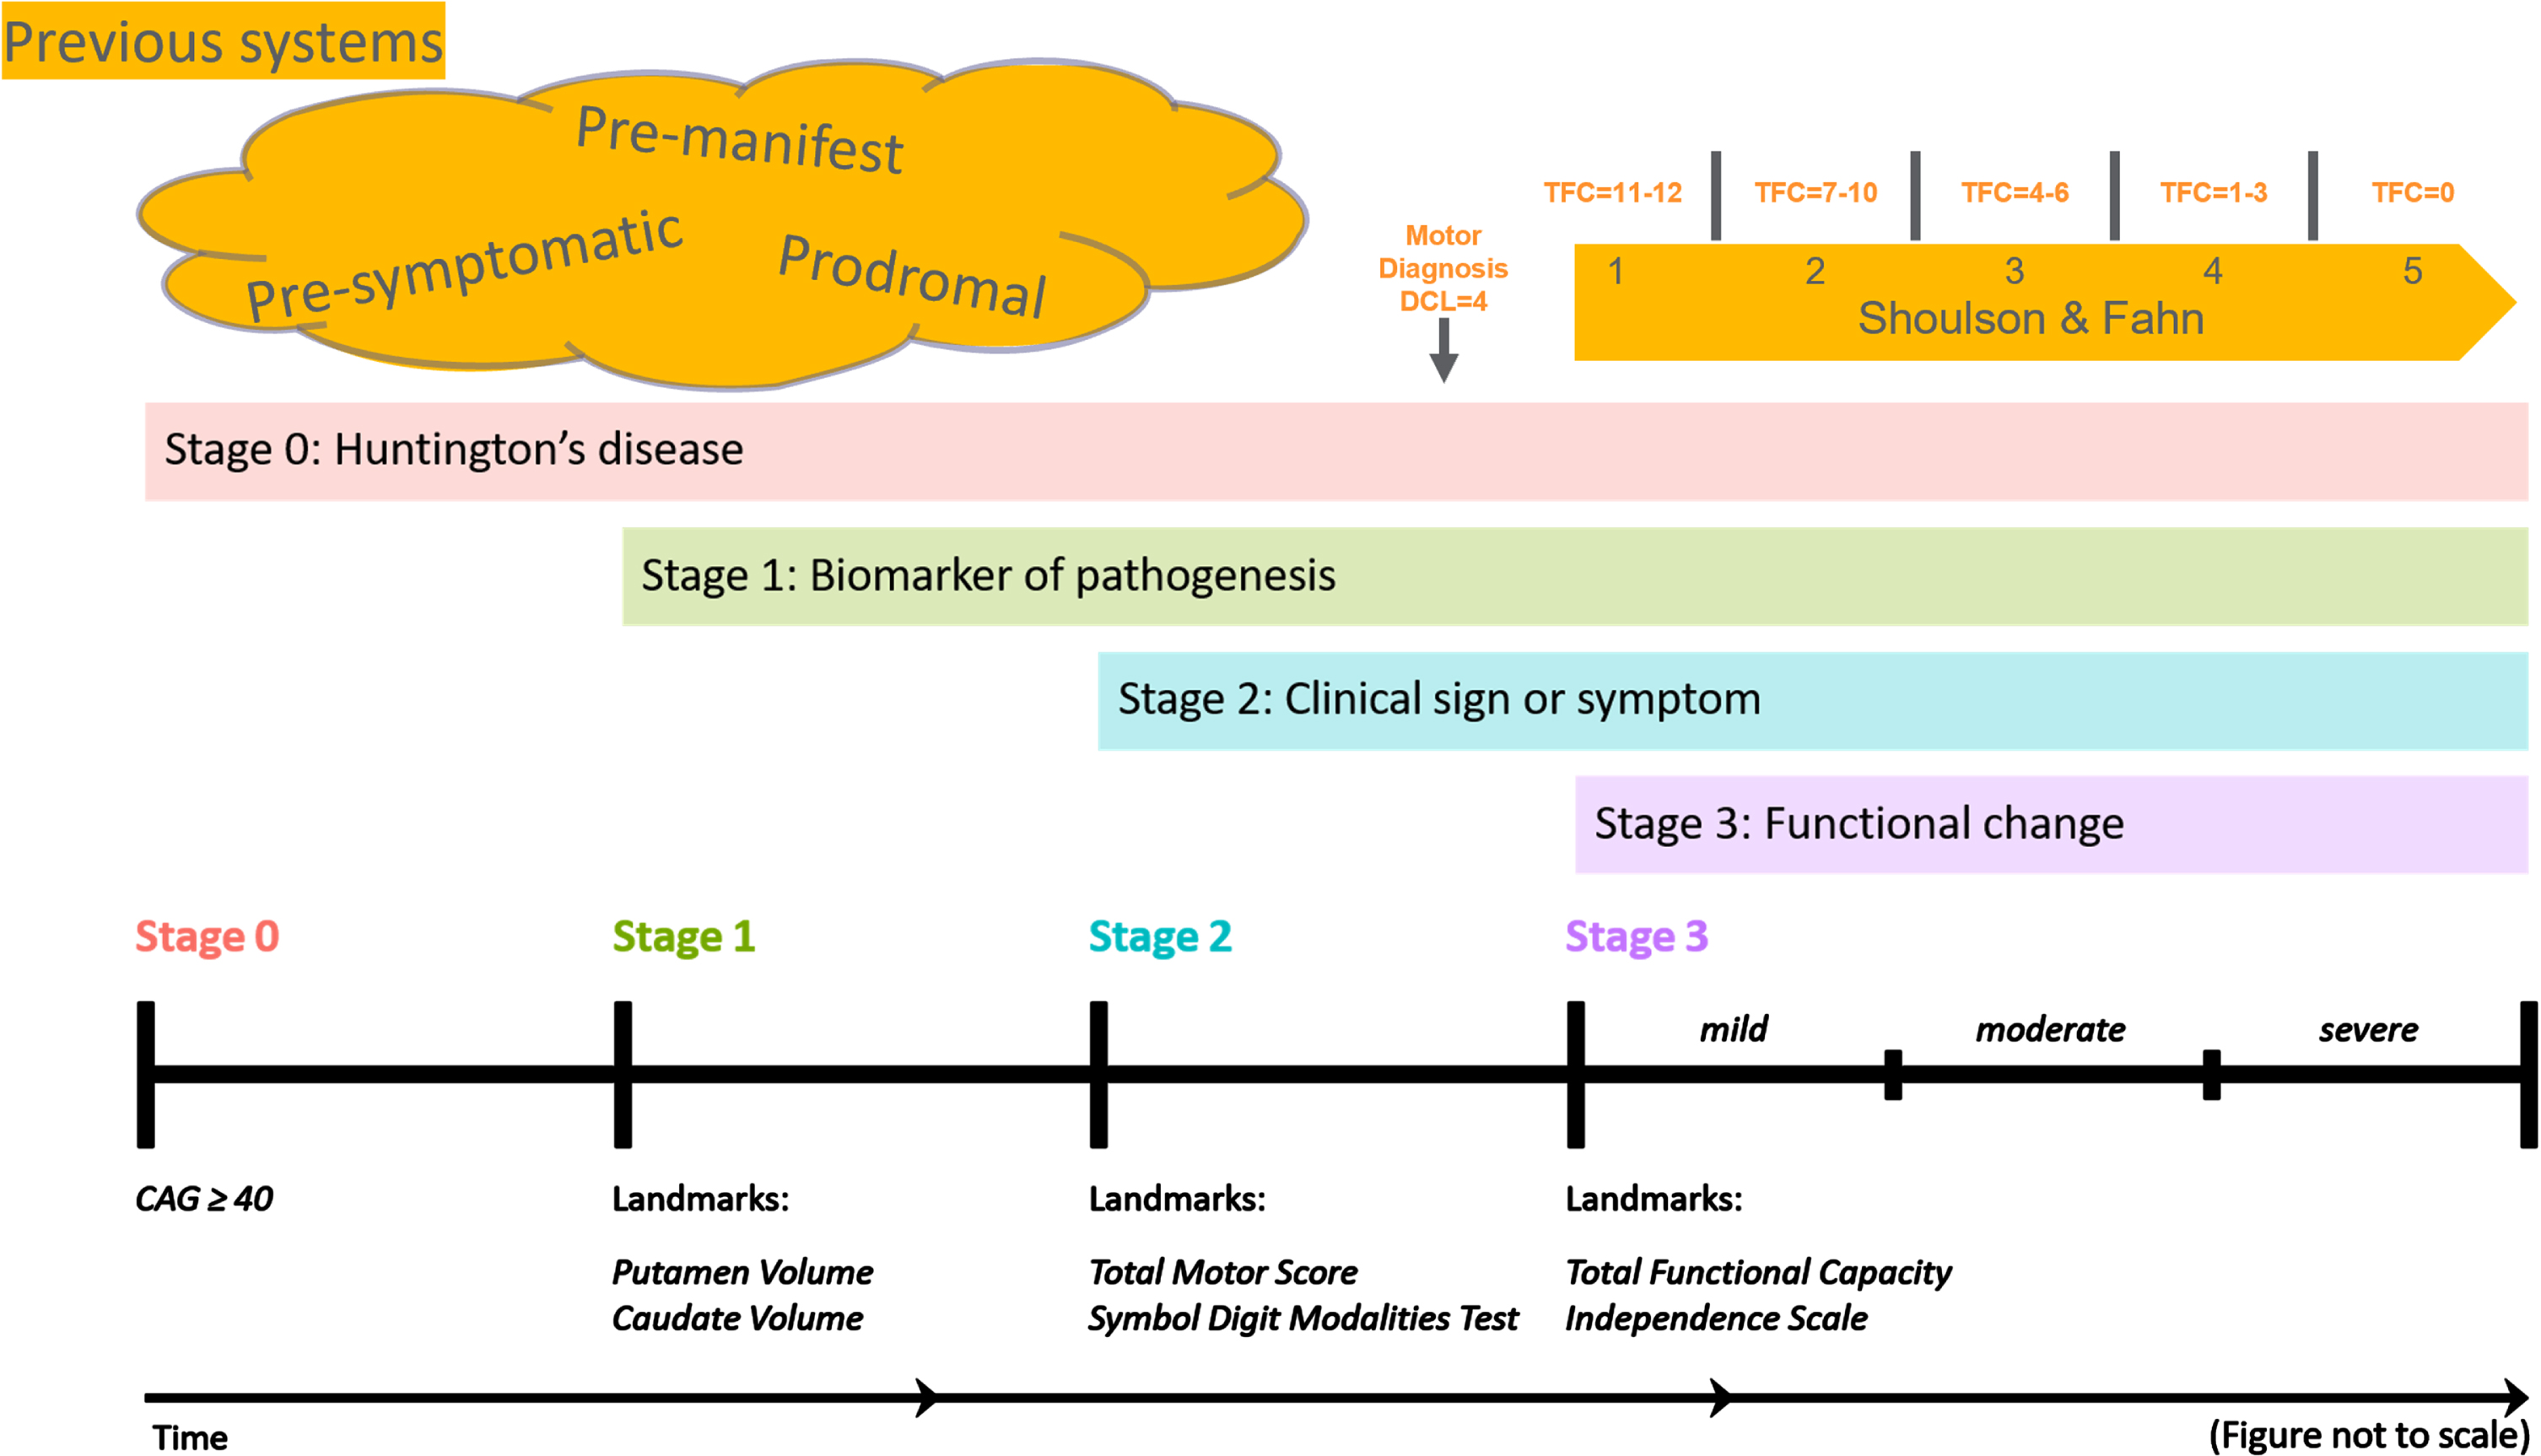 Figure 1 provides a schematic representation of how the Huntington’s Disease Integrated Staging System (HD-ISS) aligns with the terminology traditionally used in HD research. In this diagram: •Clinical motor diagnosis, or a Diagnostic Confidence Level (DCL) of 4, corresponds to the latter part of HD-ISS stage 2. •The Shoulson and Fahn stages, which are applicable after clinical motor diagnosis and are based on specific Total Functional Capacity (TFC) scores, overlap with the end of HD-ISS stage 2 and encompass all of stage 3. The figure also illustrates various terms used to denote periods before clinical motor diagnosis. While their usage has not been strictly defined, we propose that HD-ISS stages 0 and 1 can be referred to as pre-symptomatic, whereas stages 2 and 3 of the HD-ISS can be considered symptomatic stages.